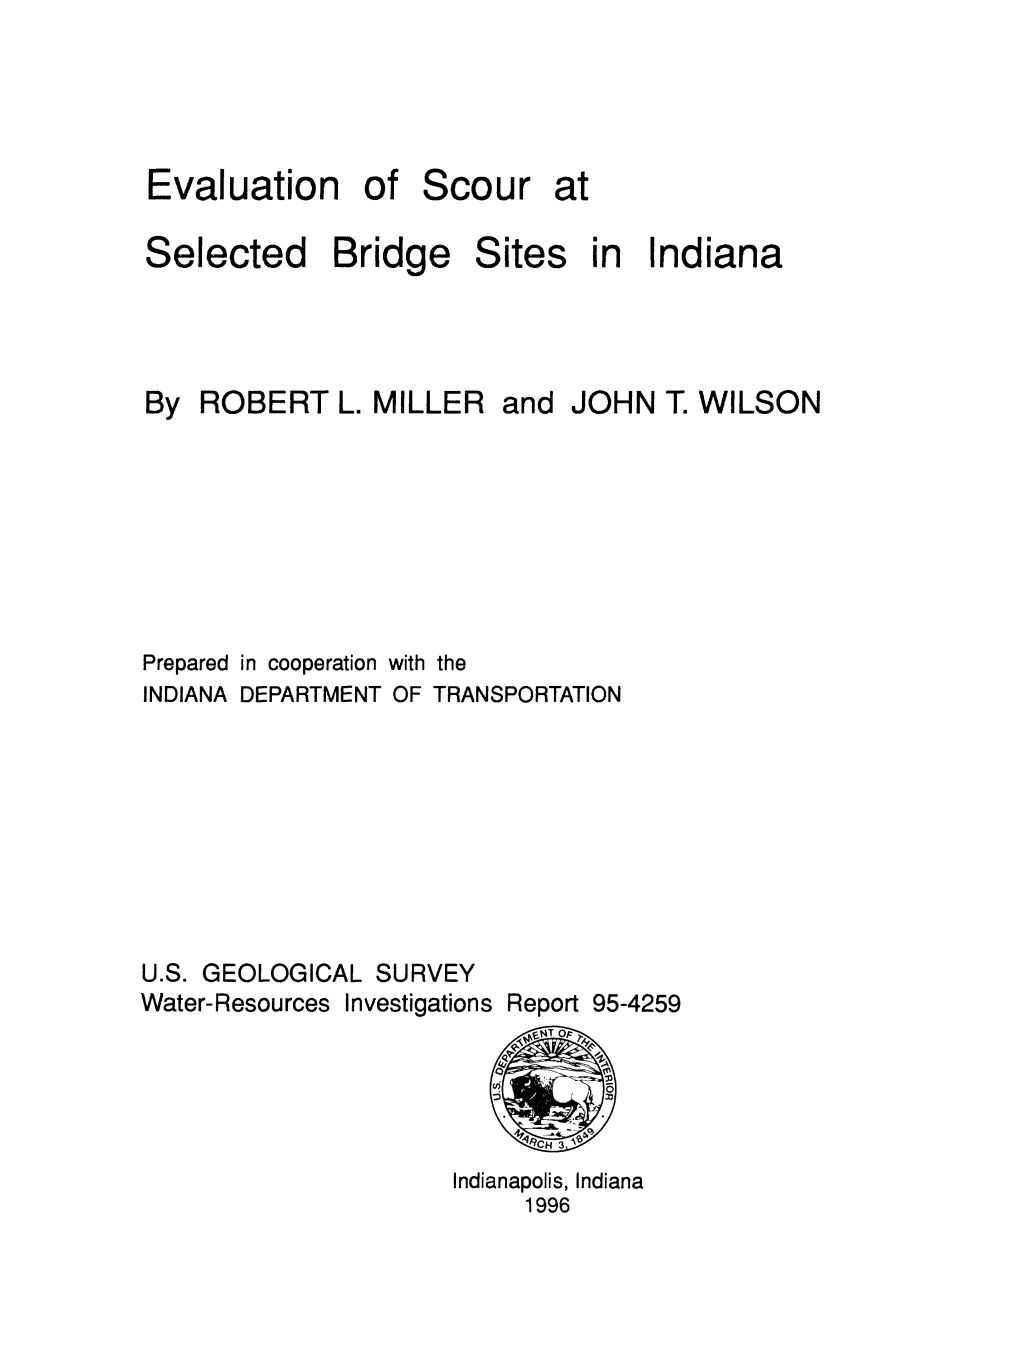 Evaluation of Scour at Selected Bridge Sites in Indiana